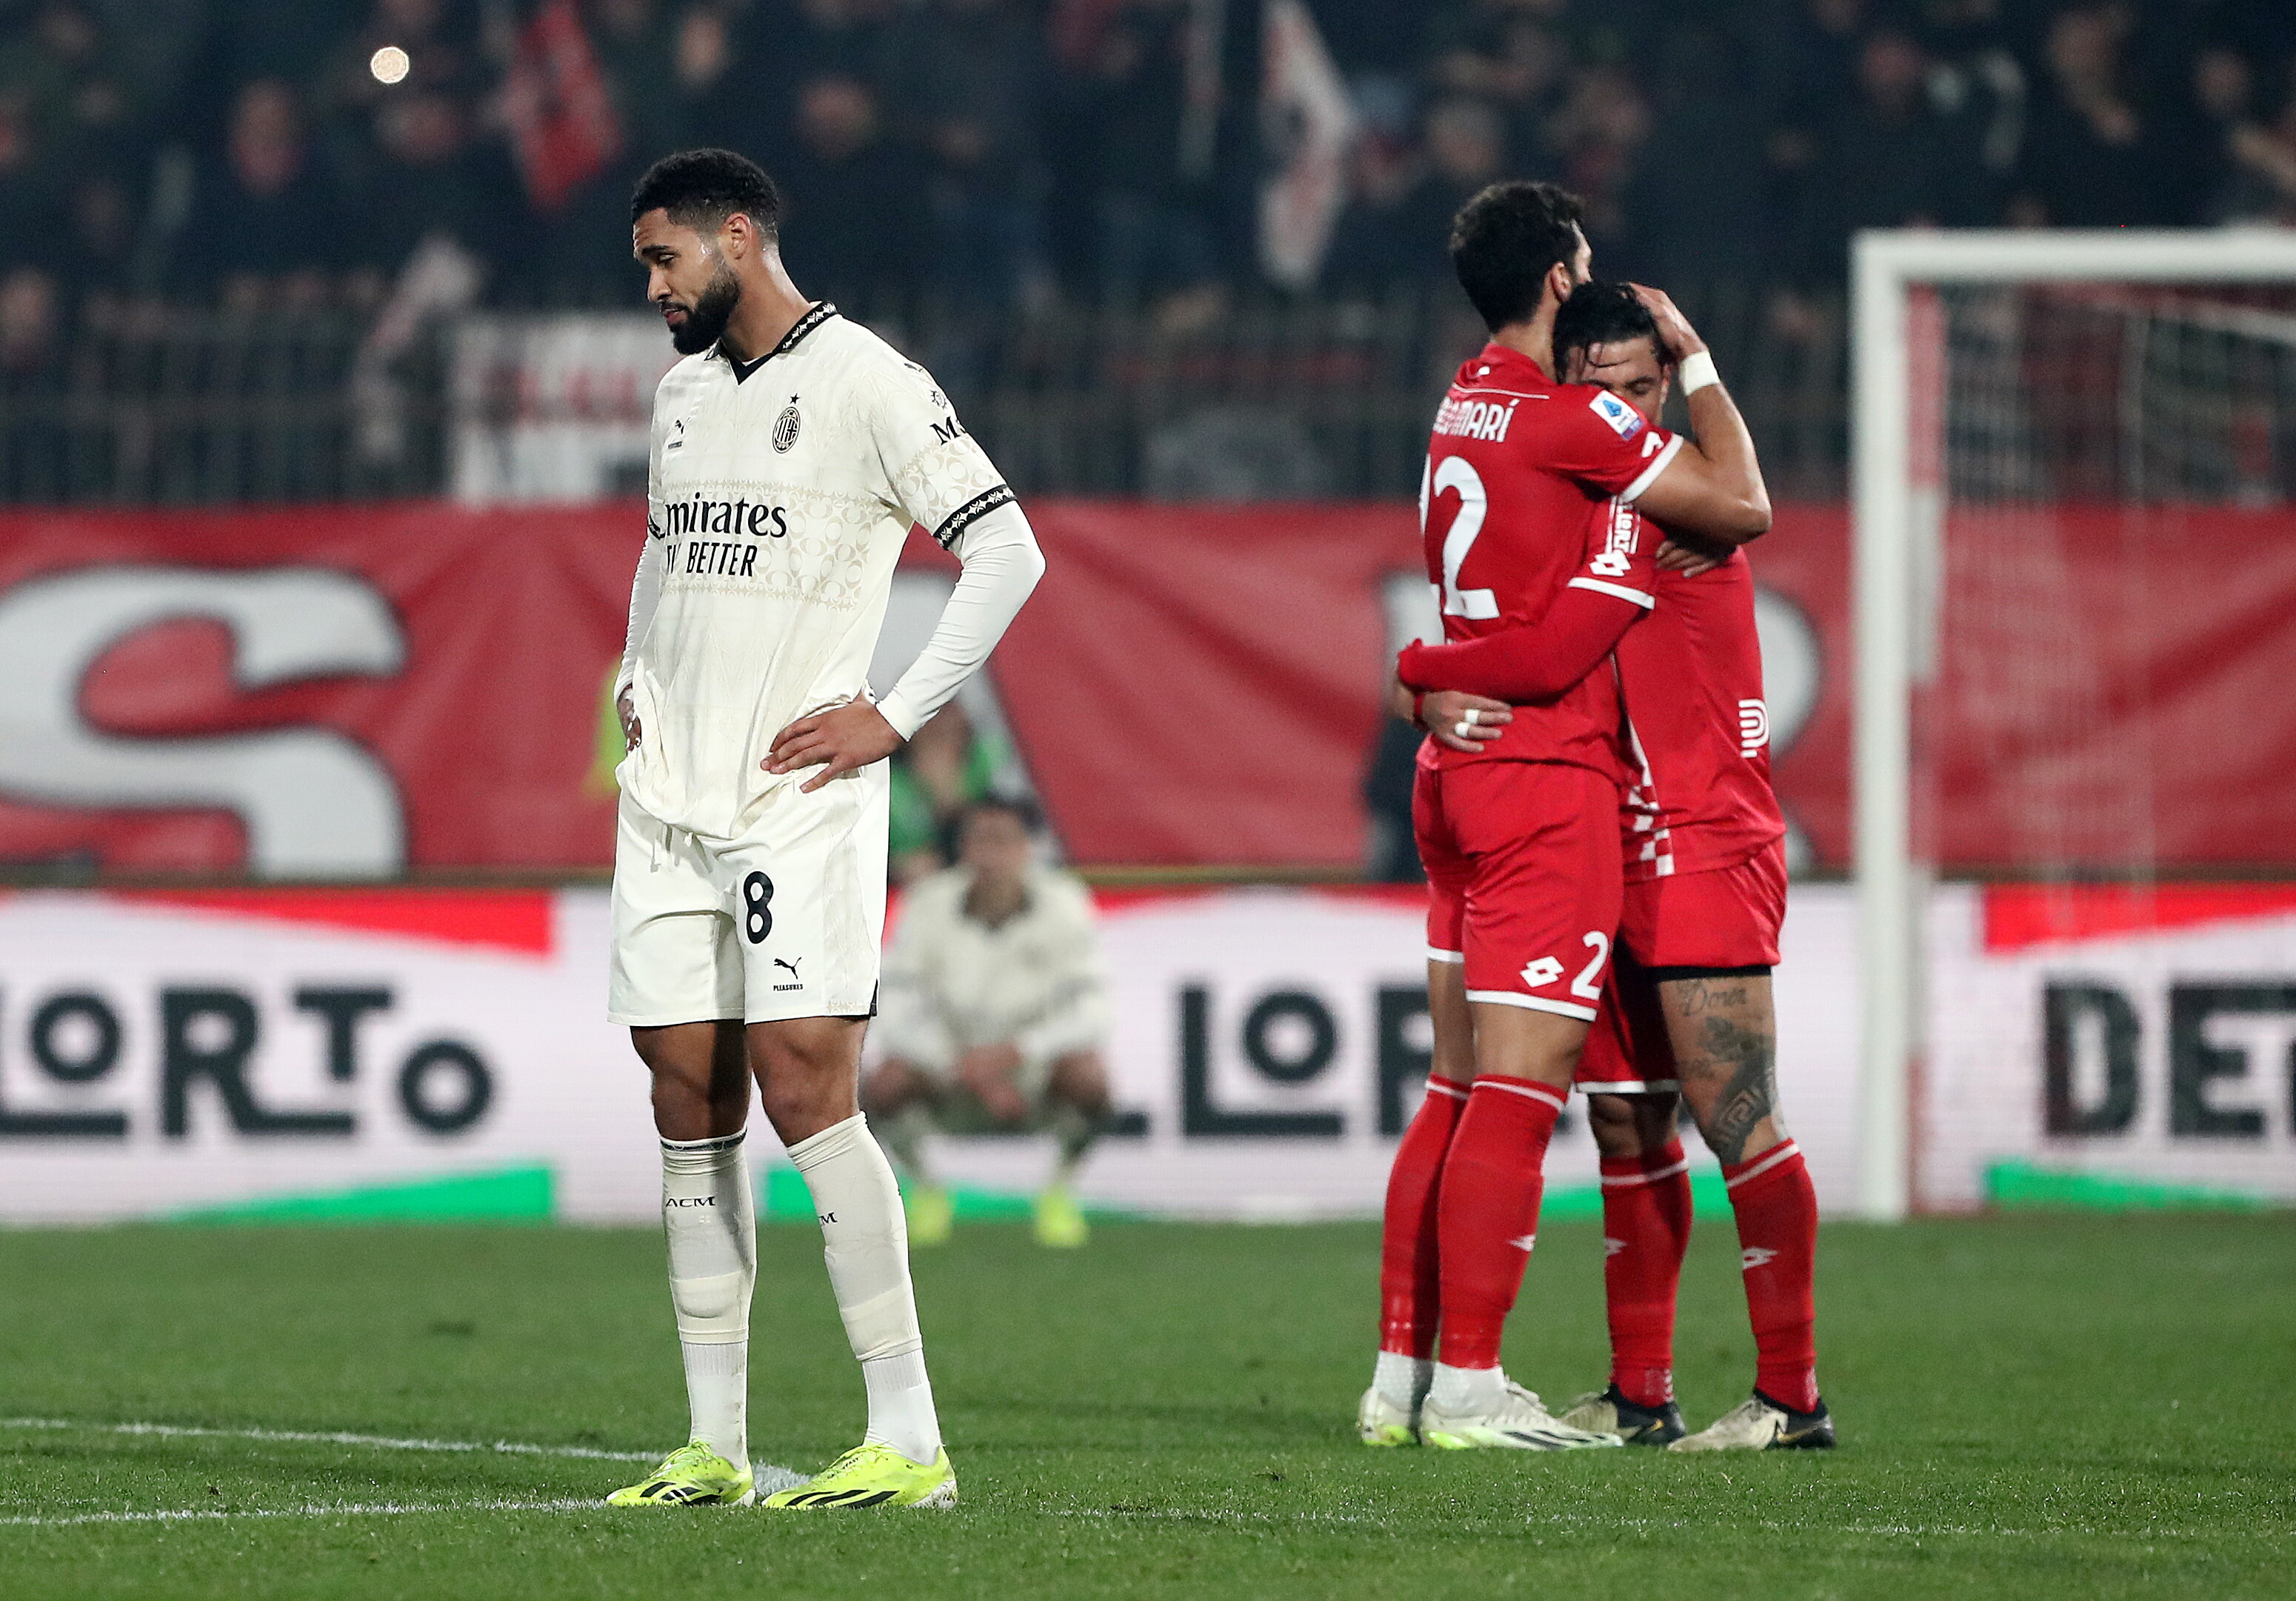 It was an evening to forget for Milan as they lost 4-2 to Monza in an eventful evening at the U Power Stadium on Sunday night